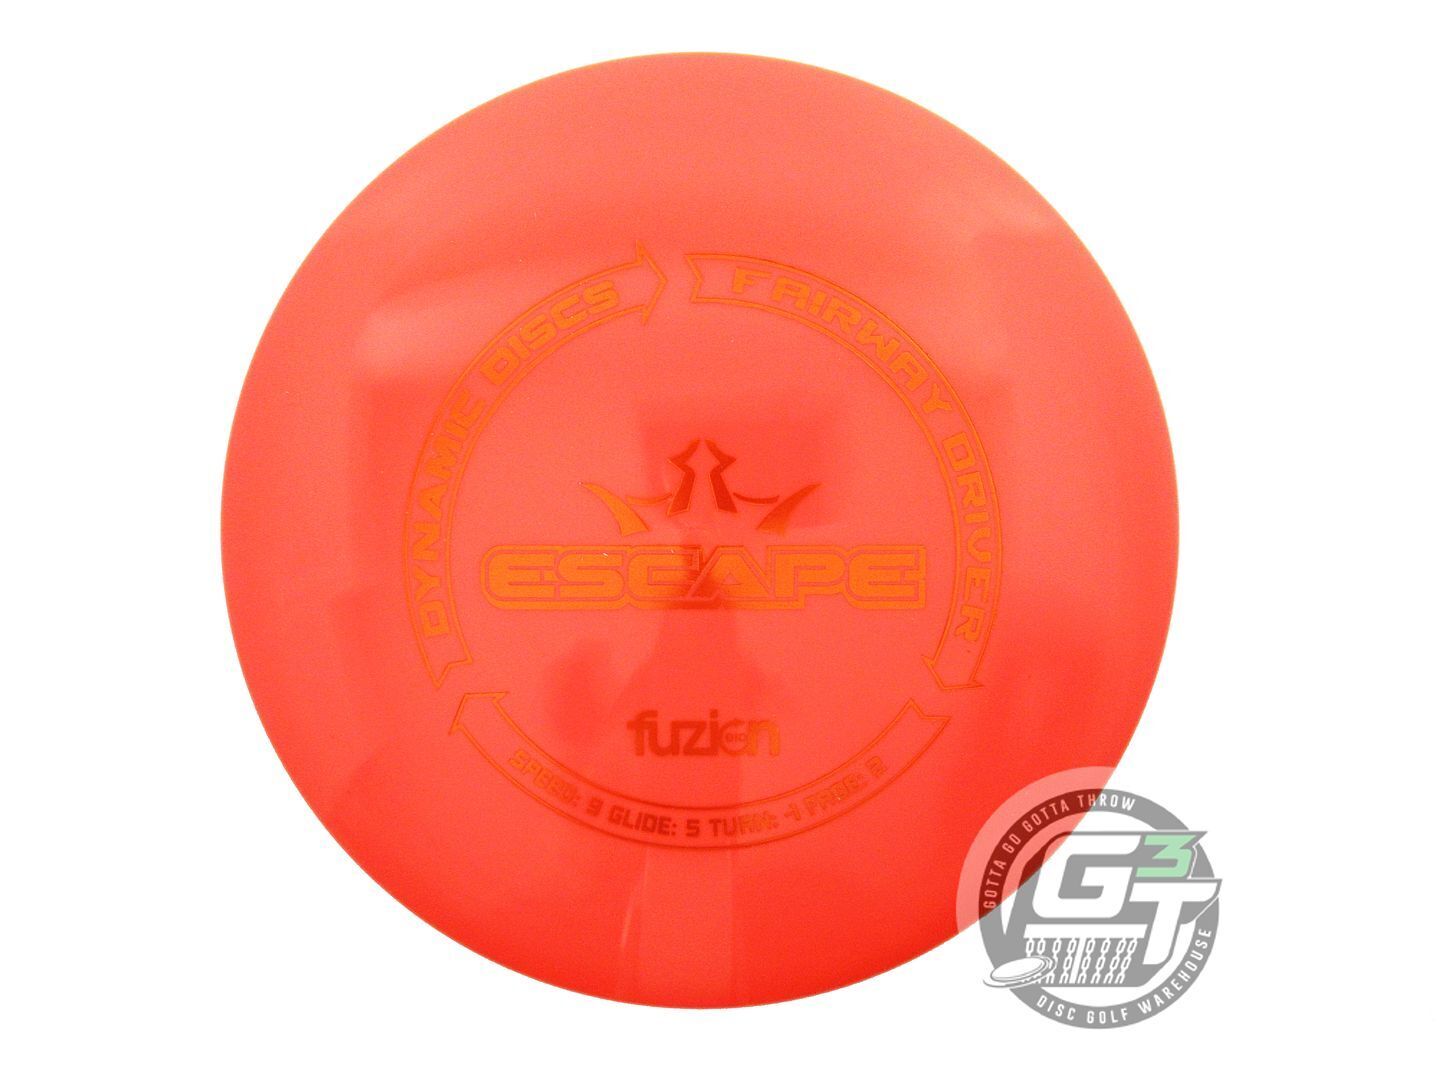 Dynamic Discs BioFuzion Escape Fairway Driver Golf Disc (Individually Listed)